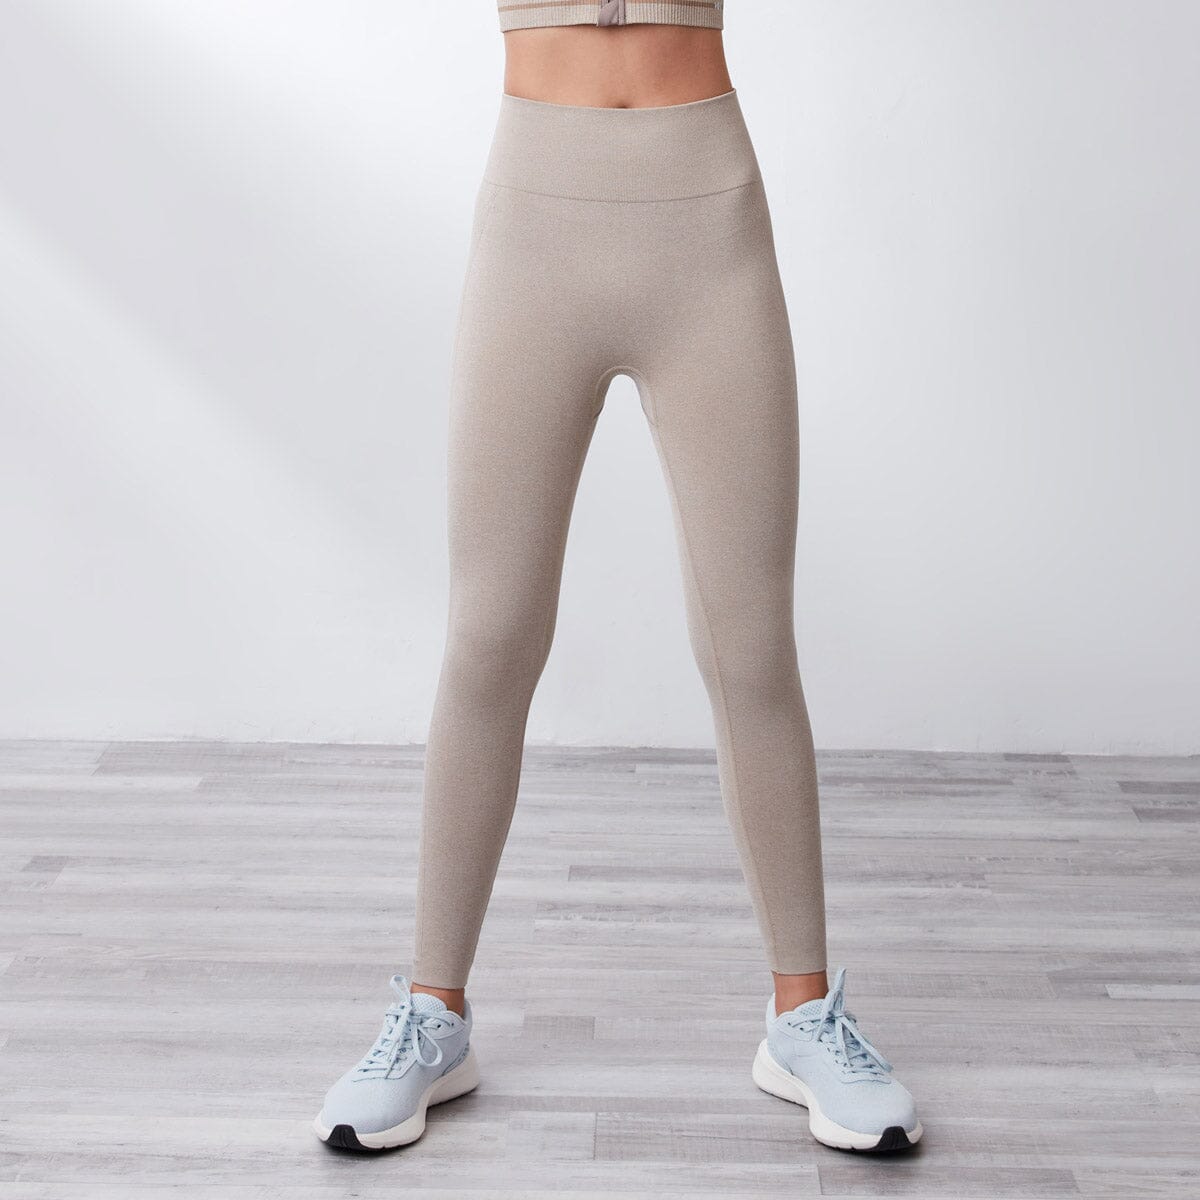 Butt-Sculpting Sustainable Seamless Knit High-Waist Cropped Petite Sports Leggings Leggings Her own words SPORTS 